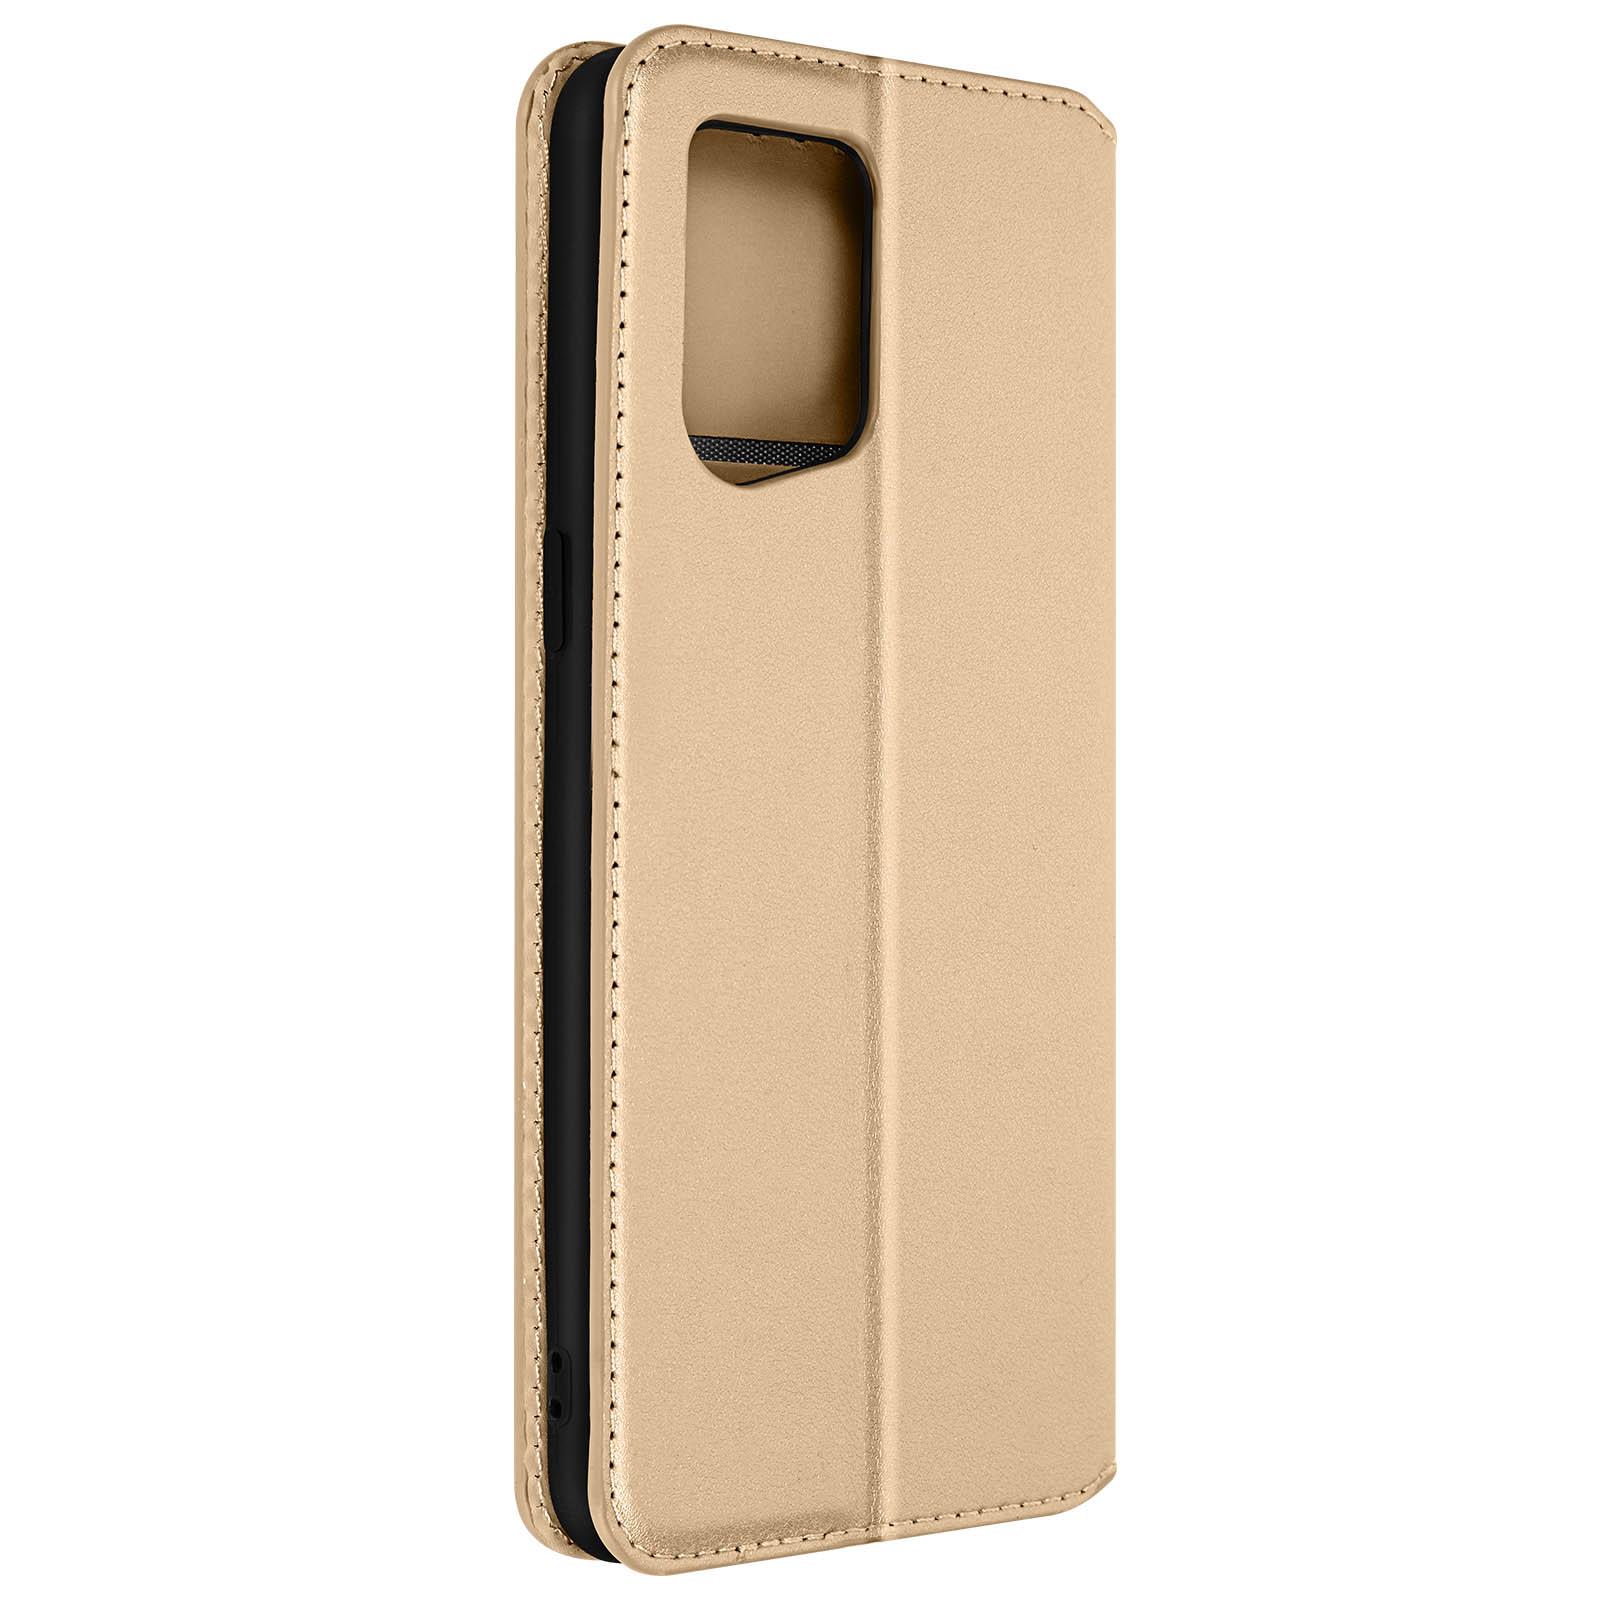 Backcover Pro, X5 Magnetklappe Series, AVIZAR Bookcover, mit Find Edition, Gold Oppo, Classic